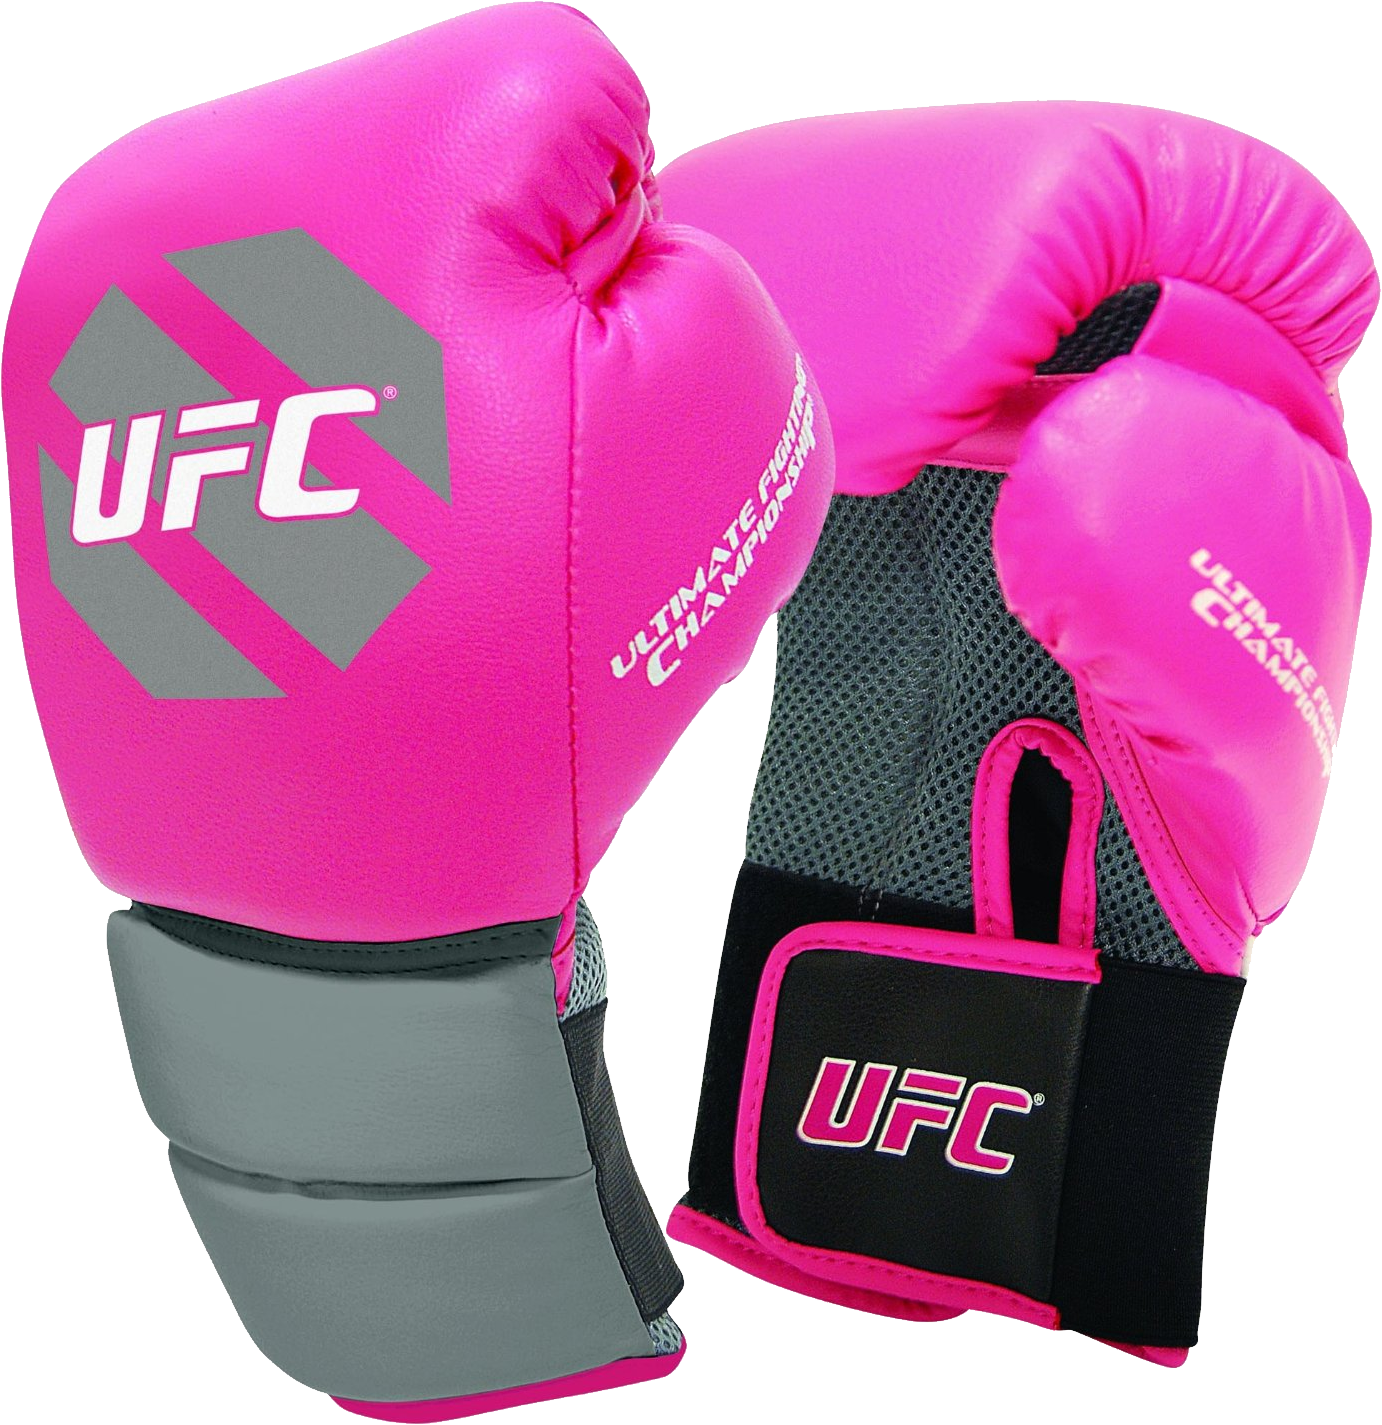 boxing gloves png images are download crazypngm crazy png images download #29246